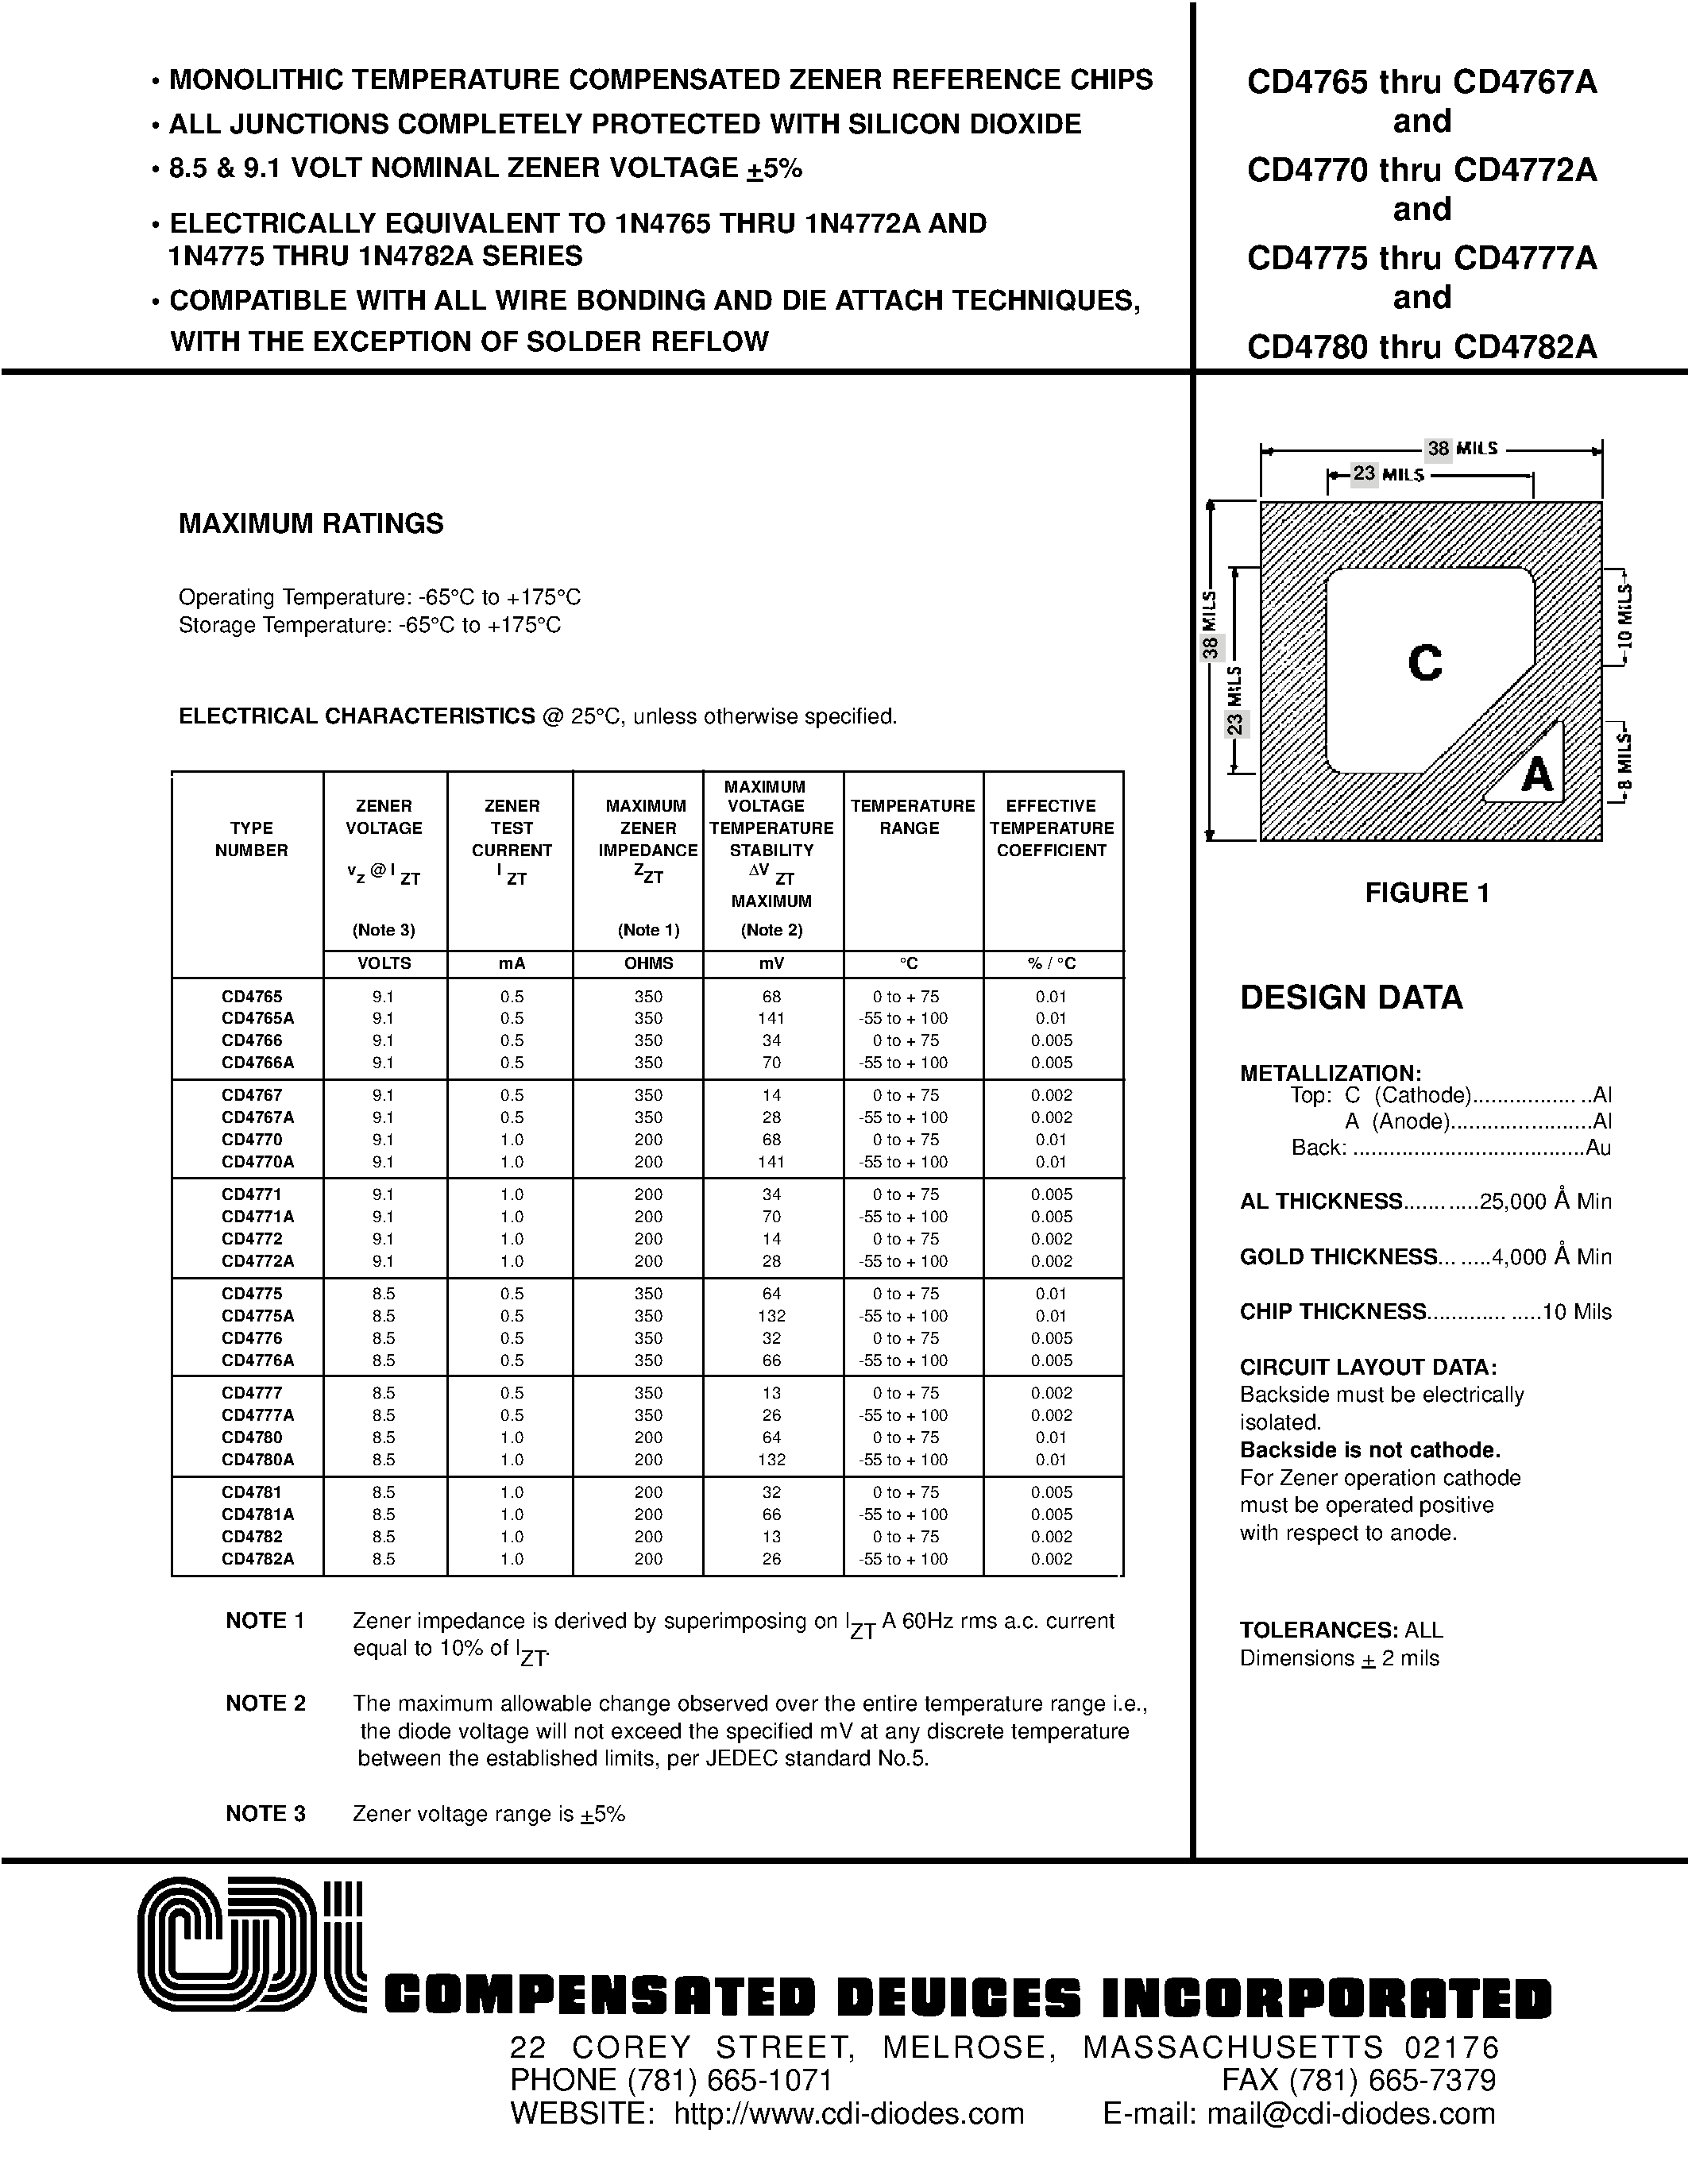 Datasheet CD4771 - MONOLITHIC TEMPERATURE COMPENSATED ZENER REFERENCE CHIPS page 1